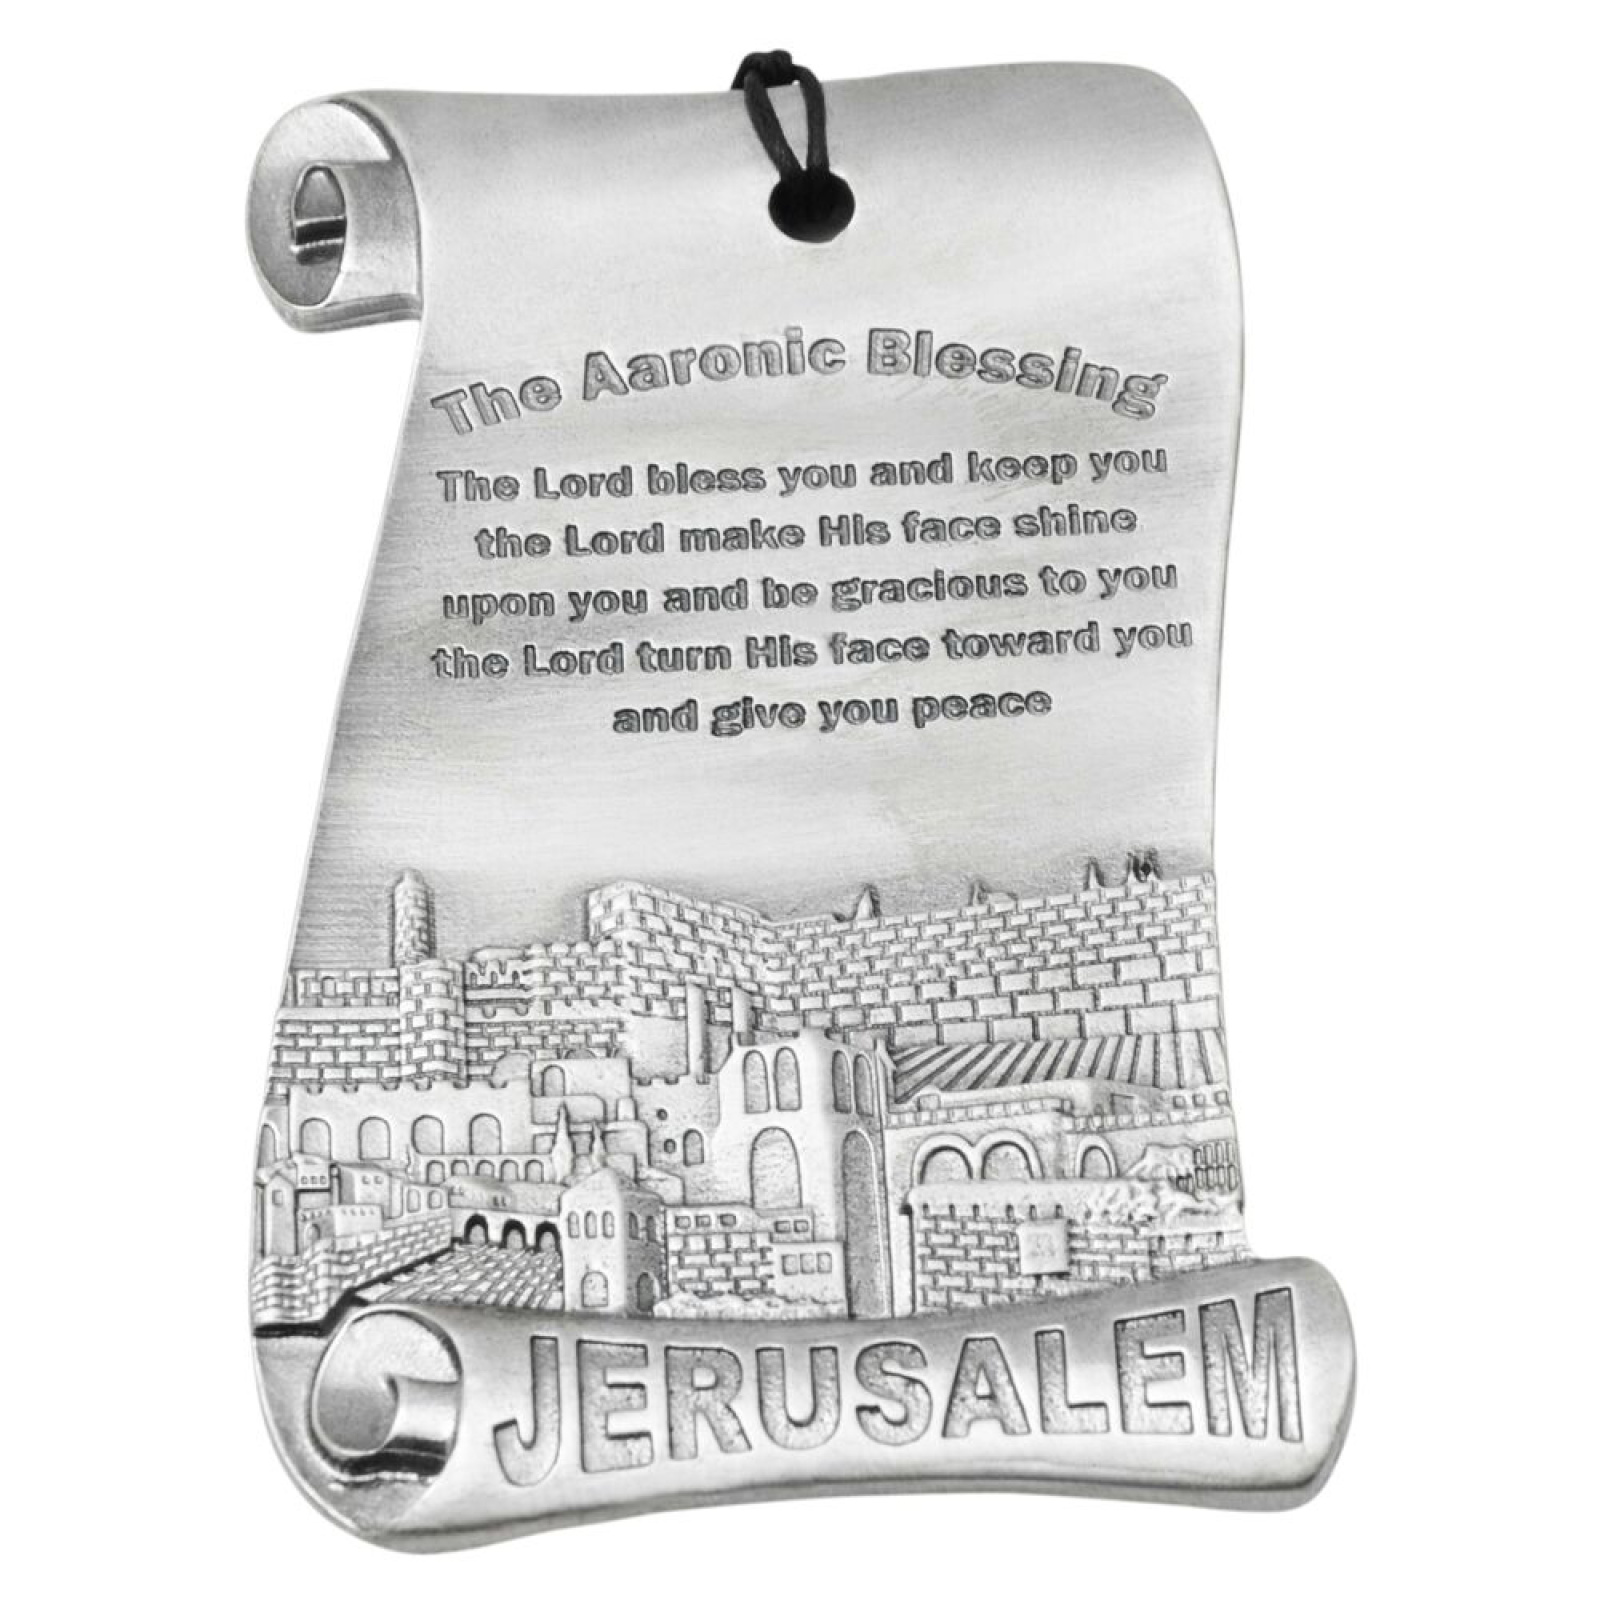 Aaronic blessing